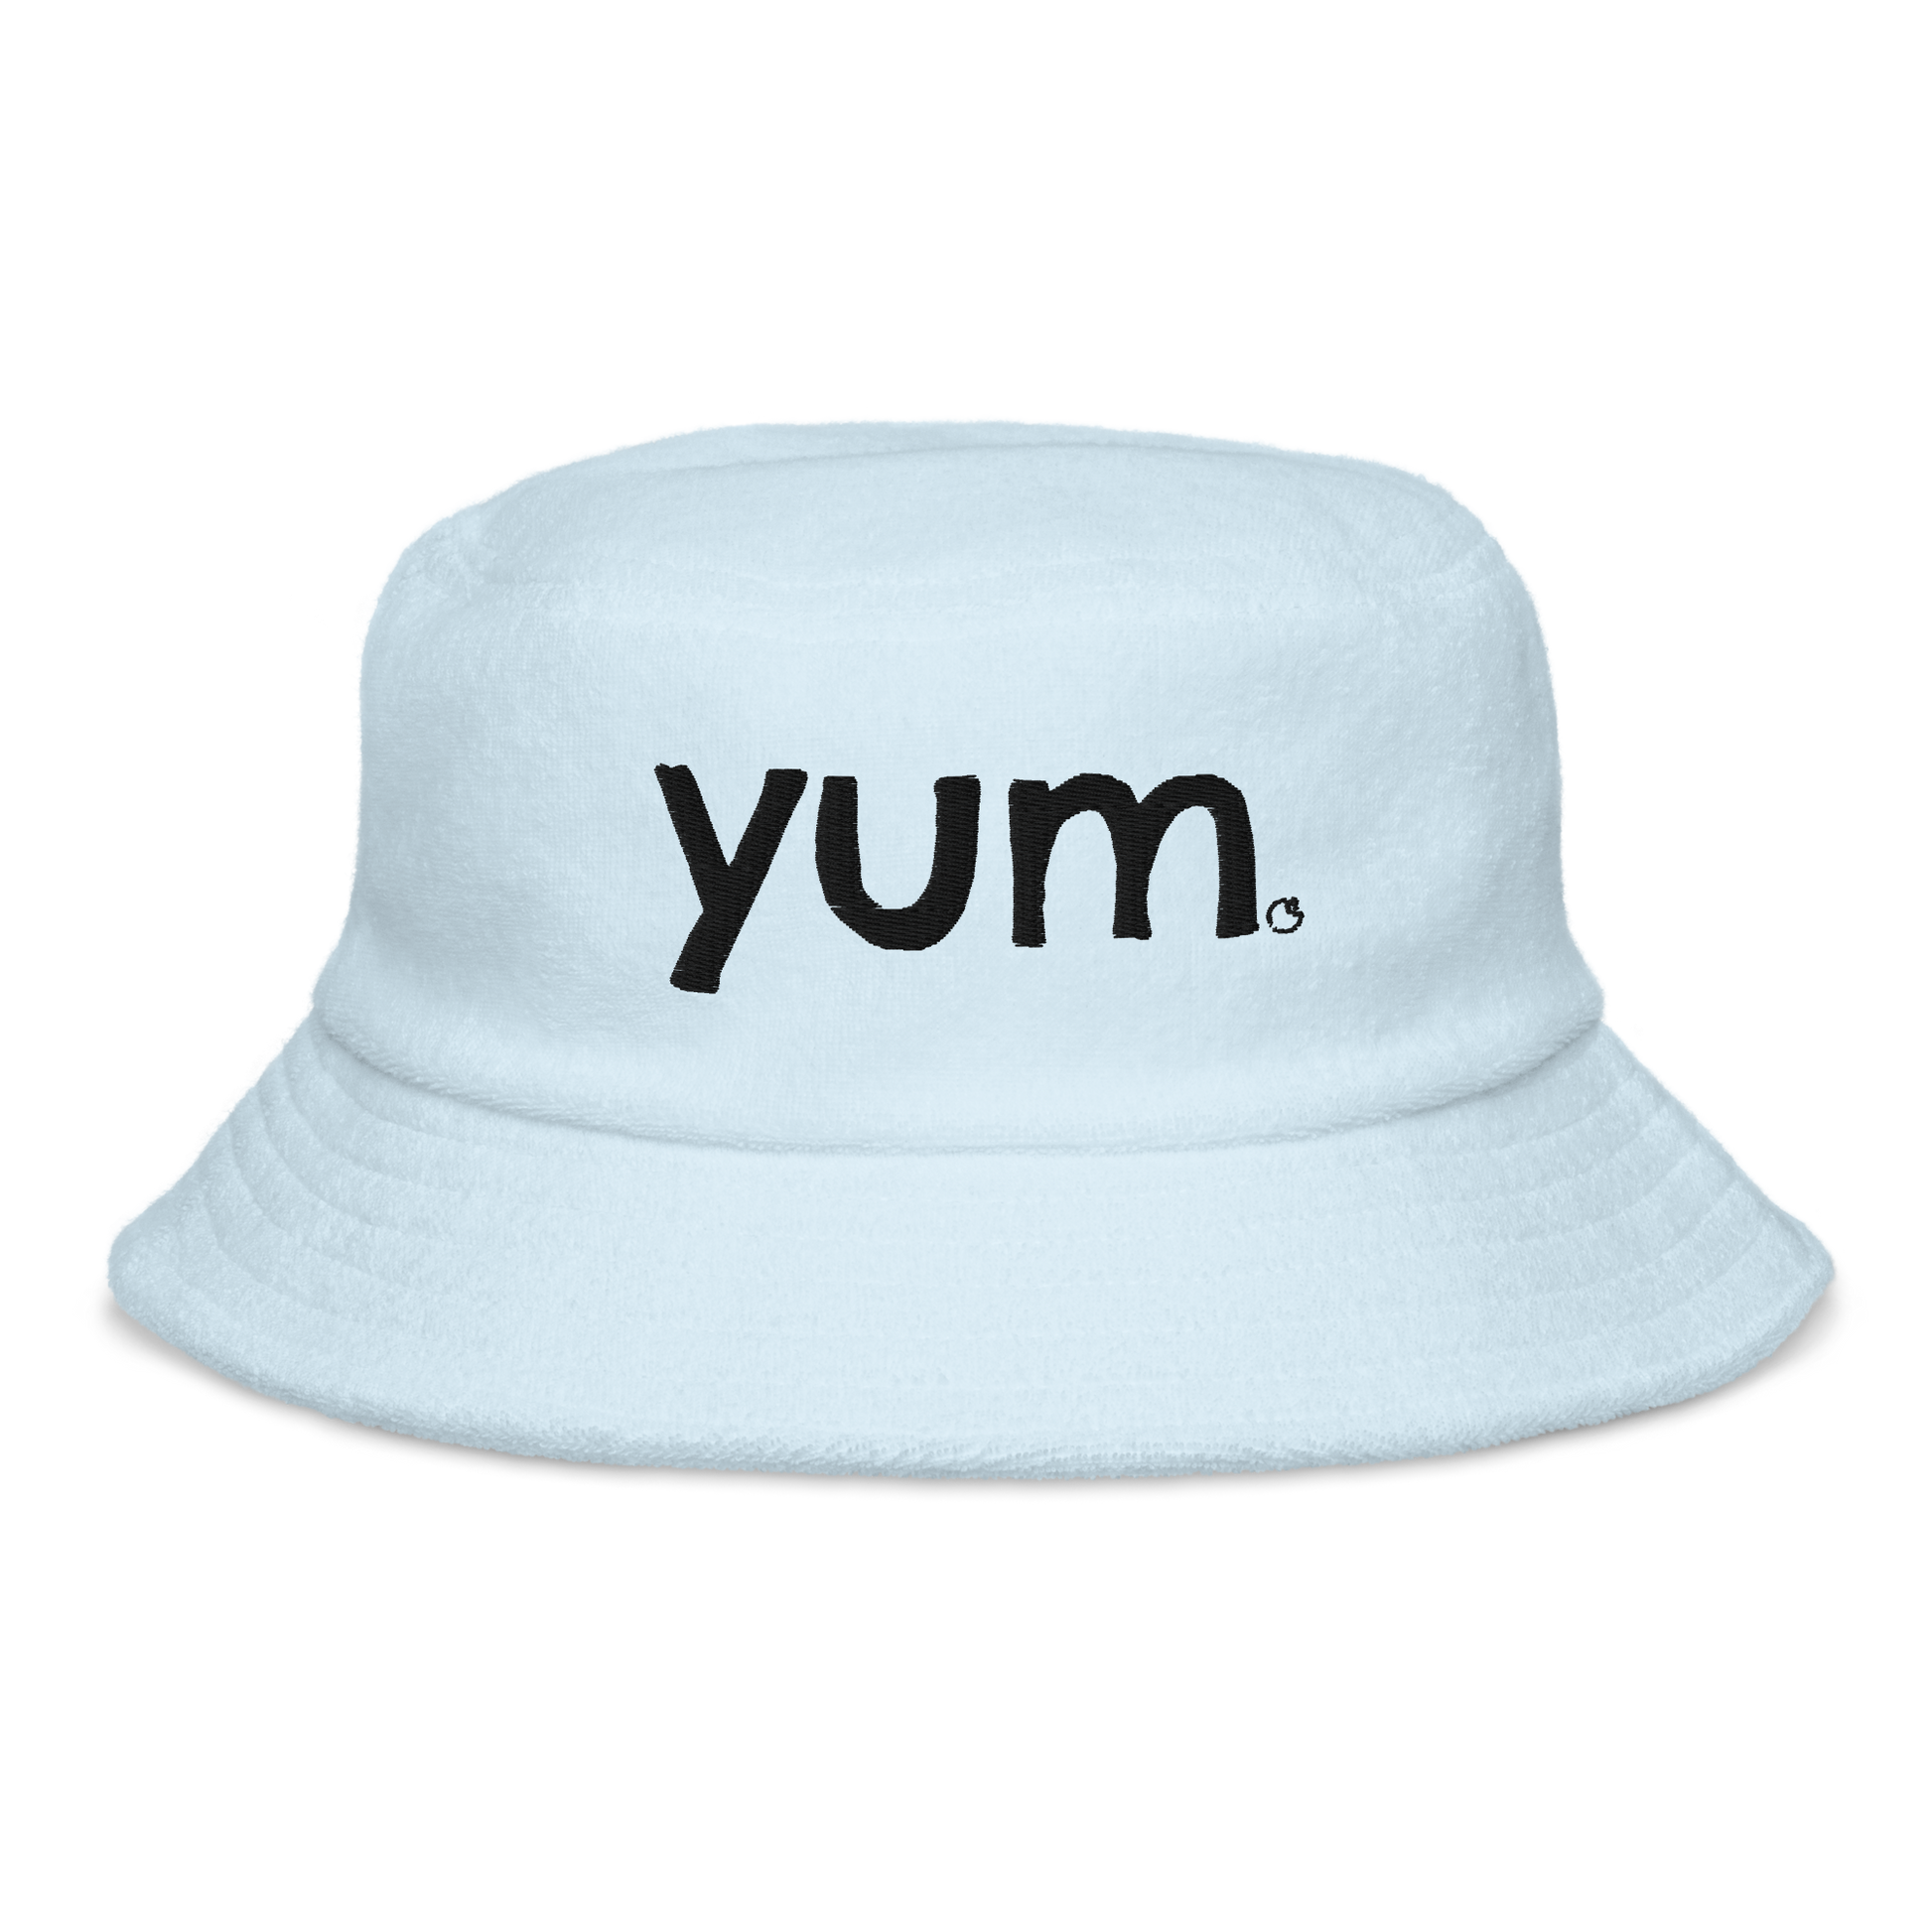 Beat the heat in style with our YUM Terry Cloth Bucket Hat. Color: Lt. Blue